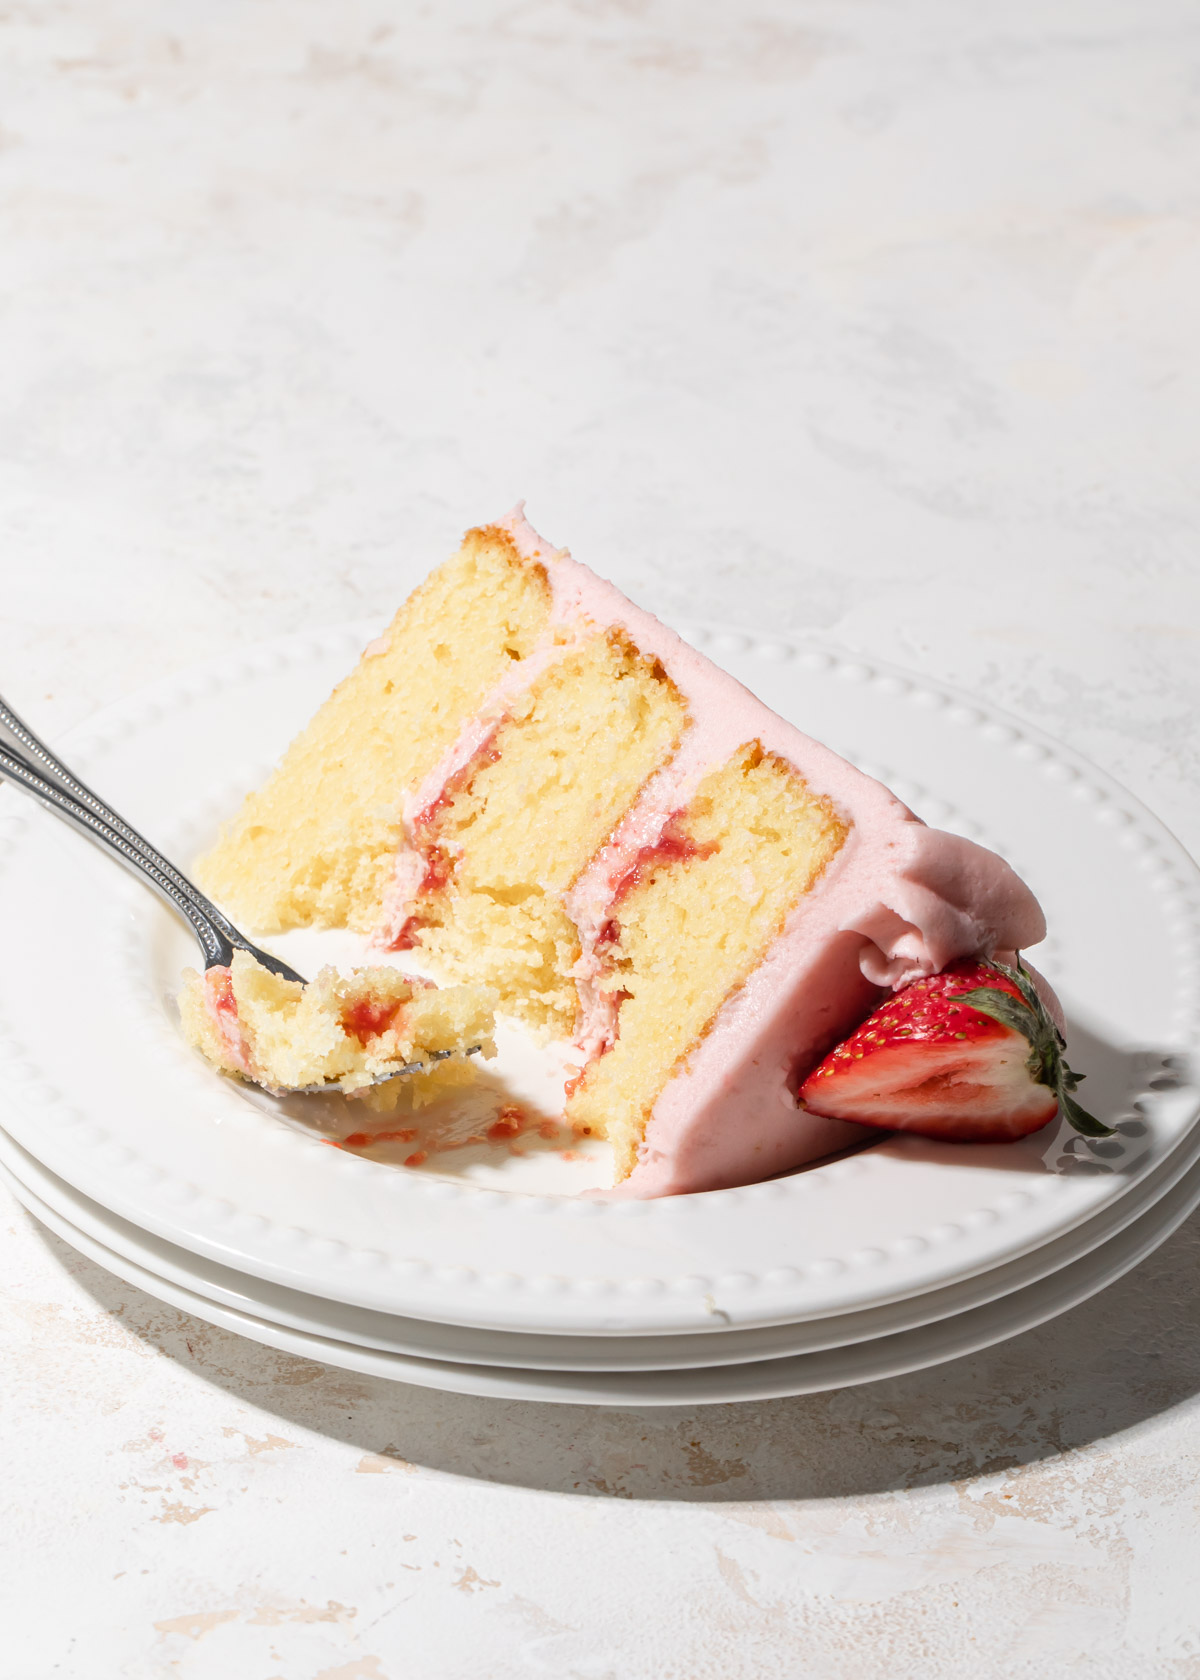 A slice of vanilla cake with strawberry filling and frosting on a stack of white plates